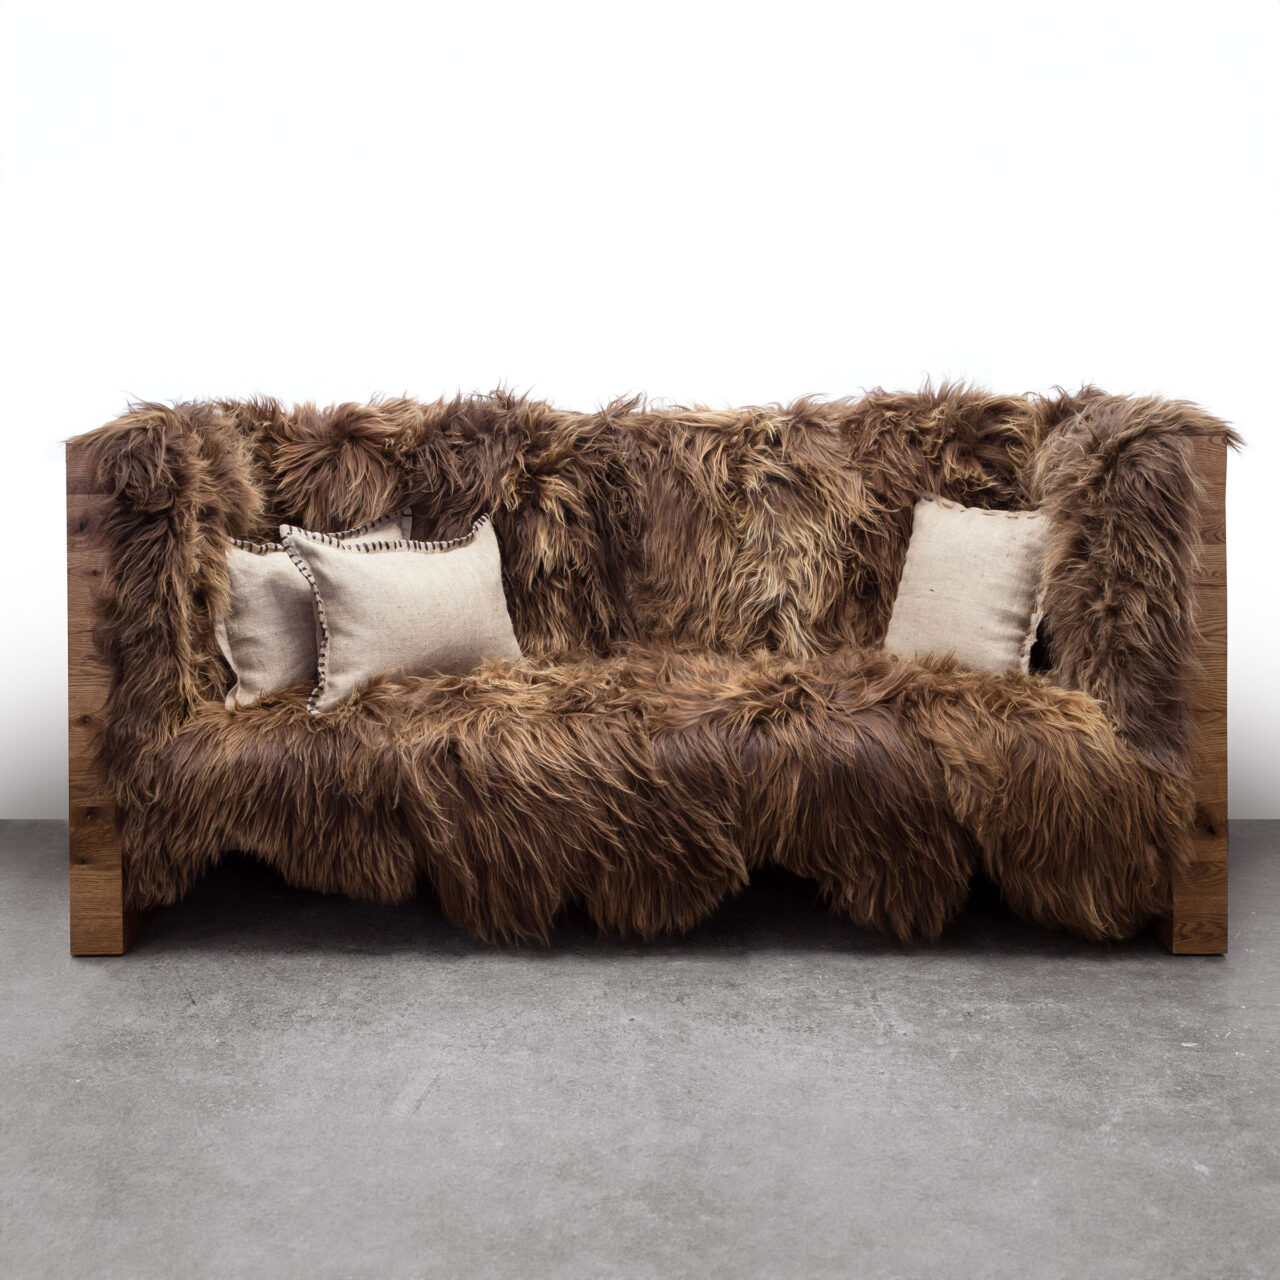 A luxurious SENTIENT long wool sofa with a dense, shaggy brown fur cover and two off-white accent pillows against a plain background.